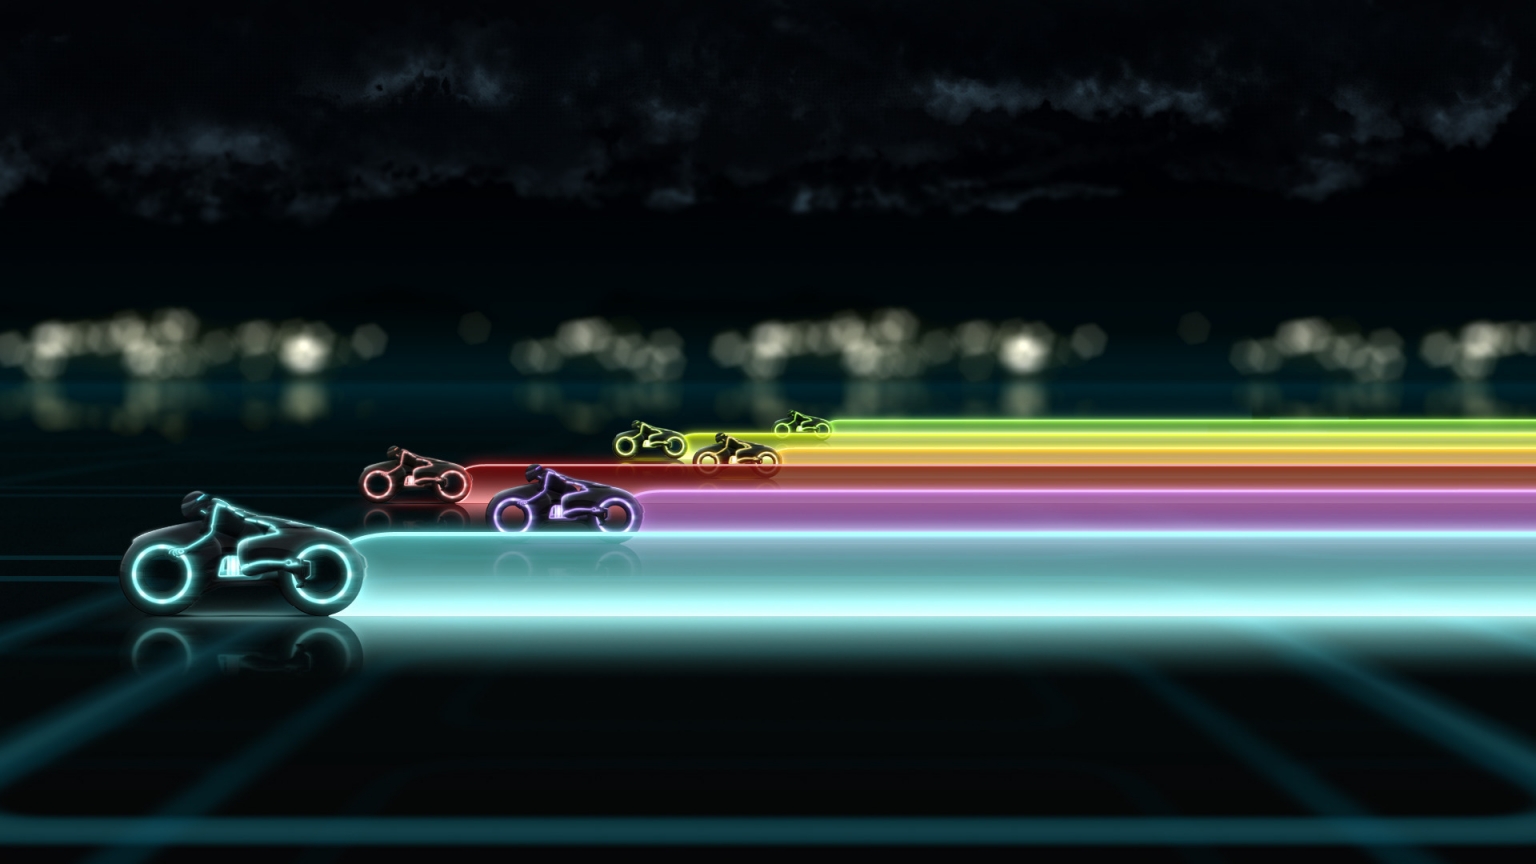 Tron Legacy Race for 1536 x 864 HDTV resolution